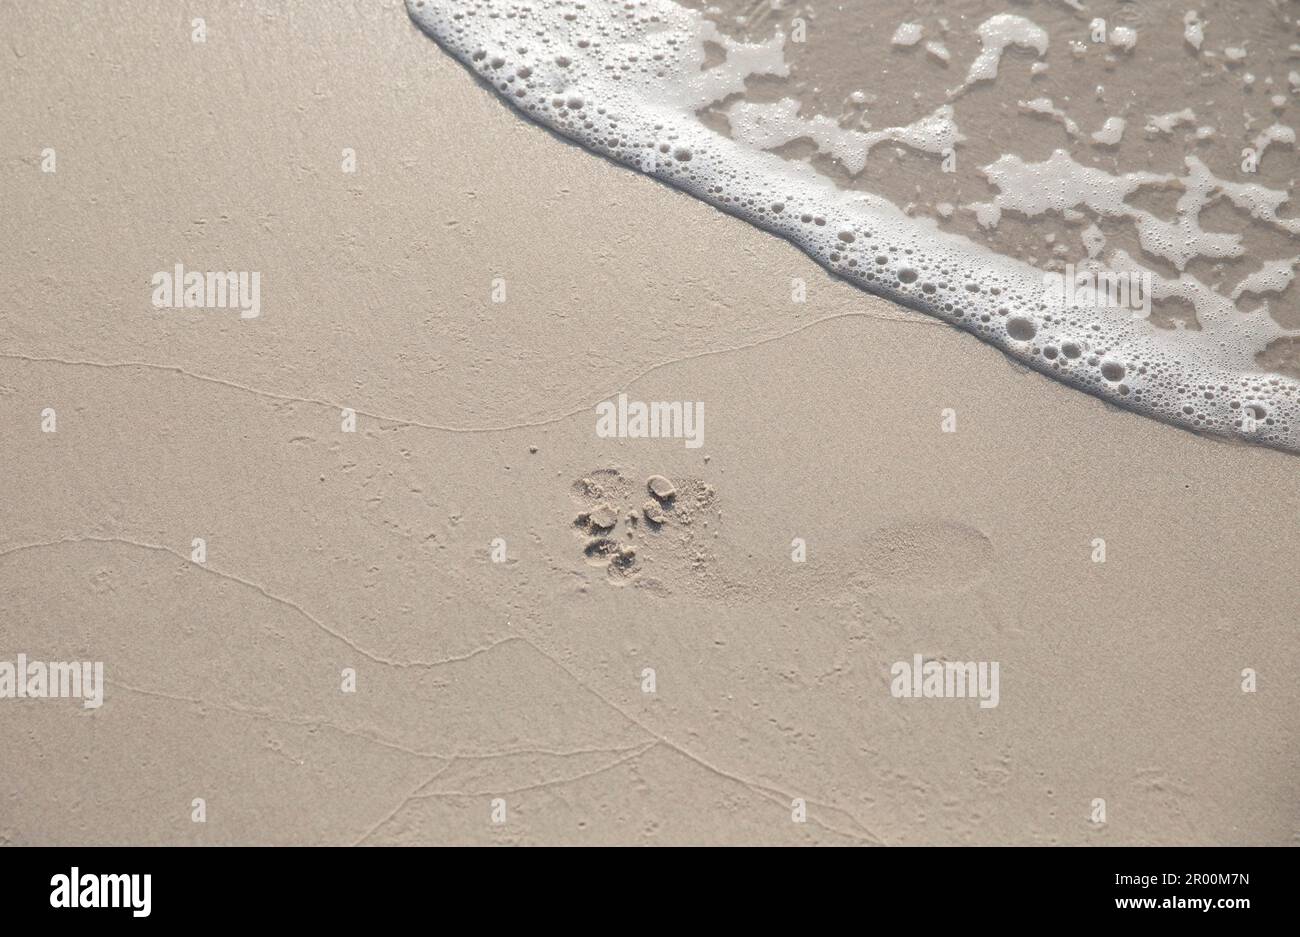 Footprint in the sand on the beach Stock Photo